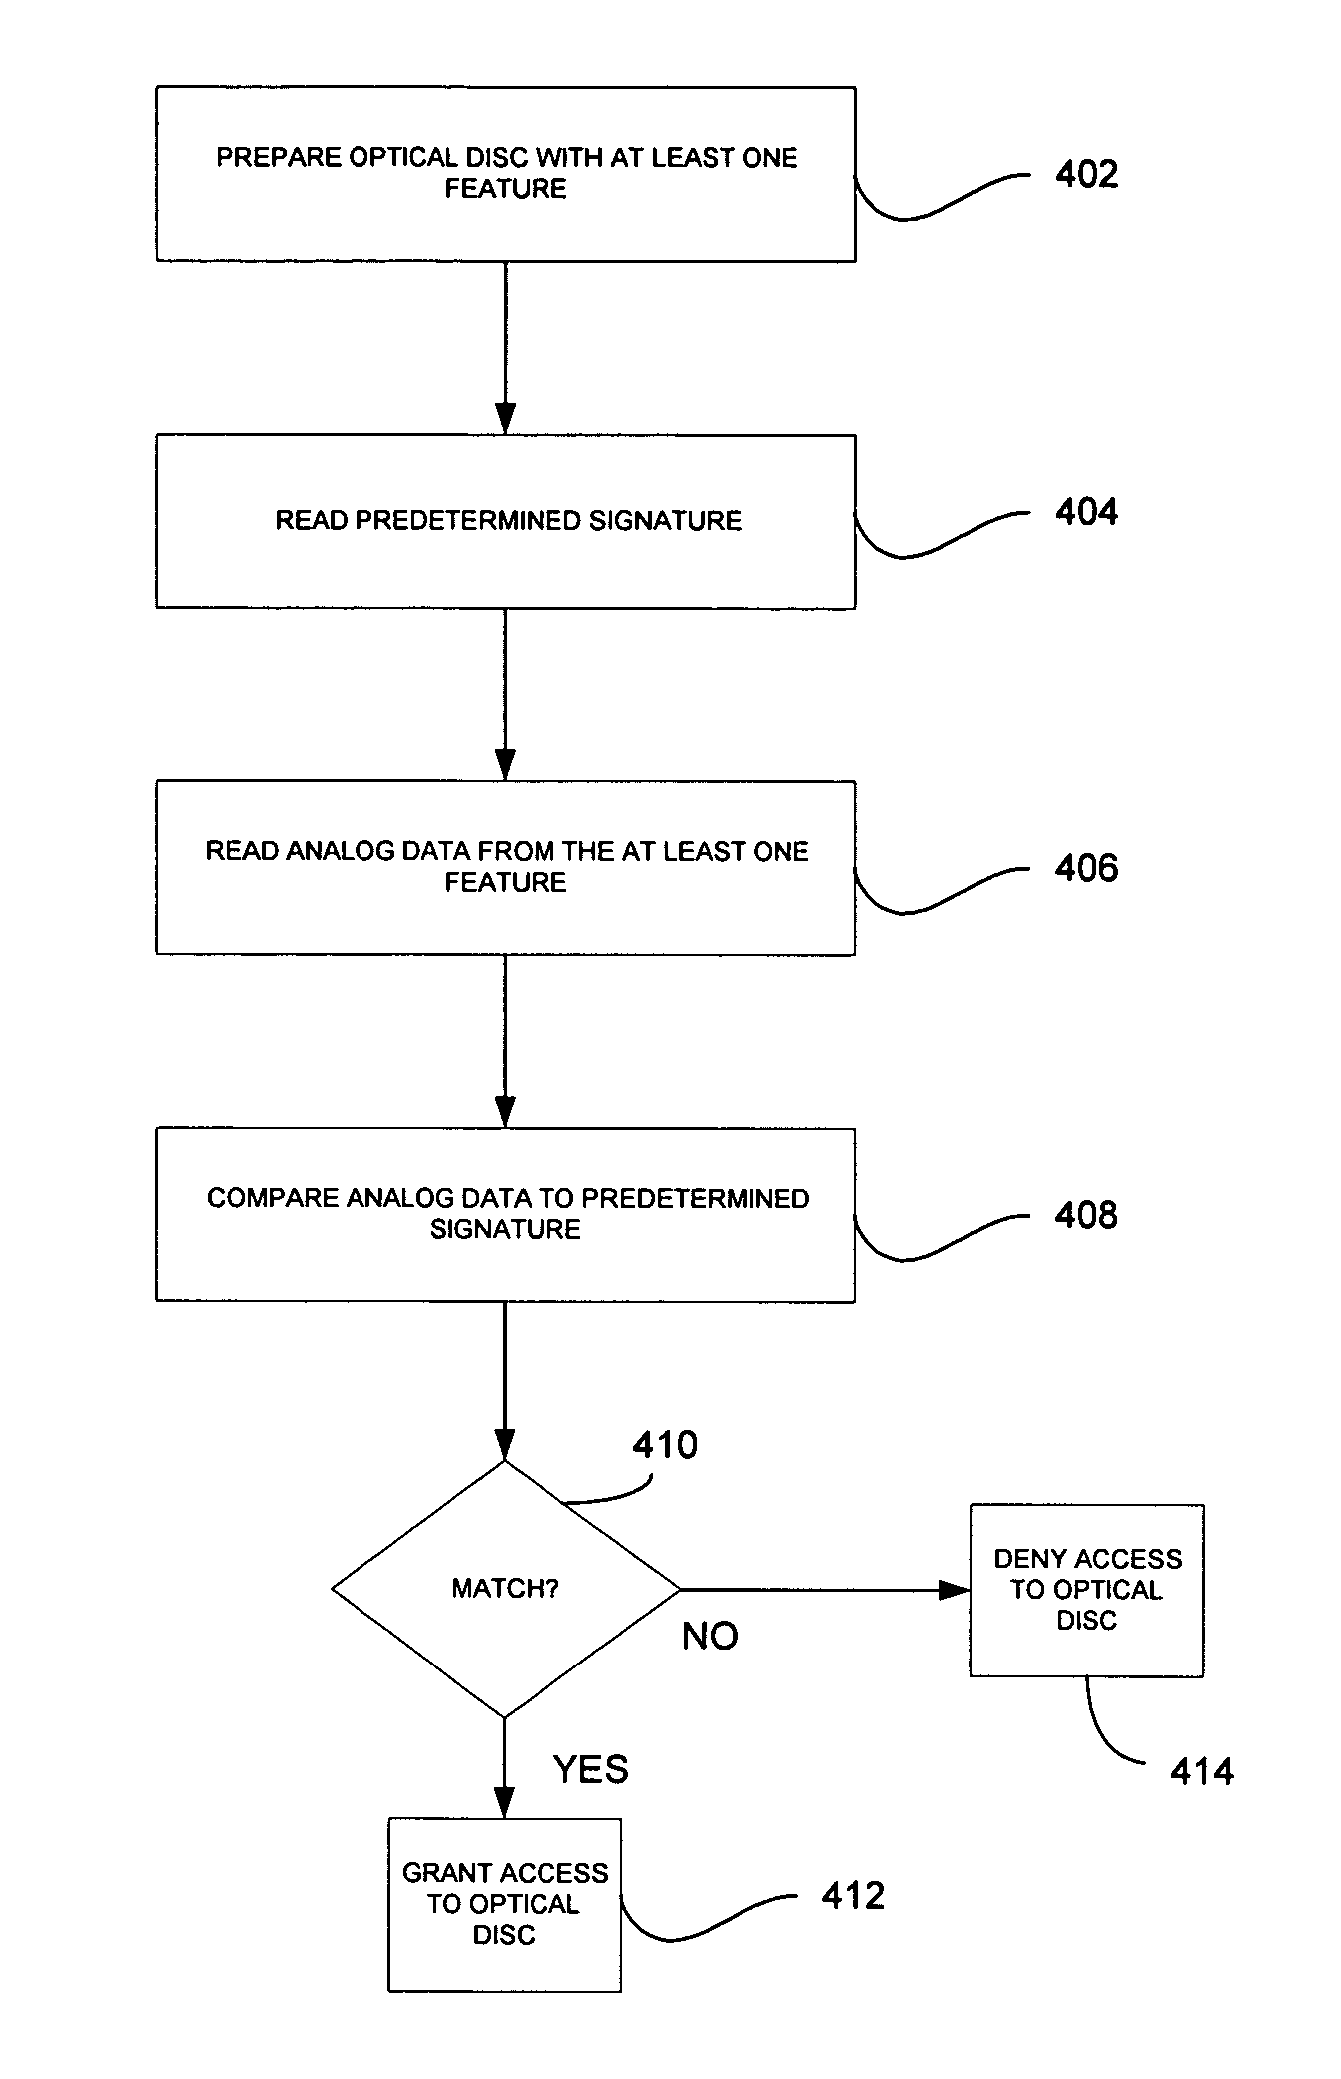 Authenticable optical disc, system for authenticating an optical disc and method thereof